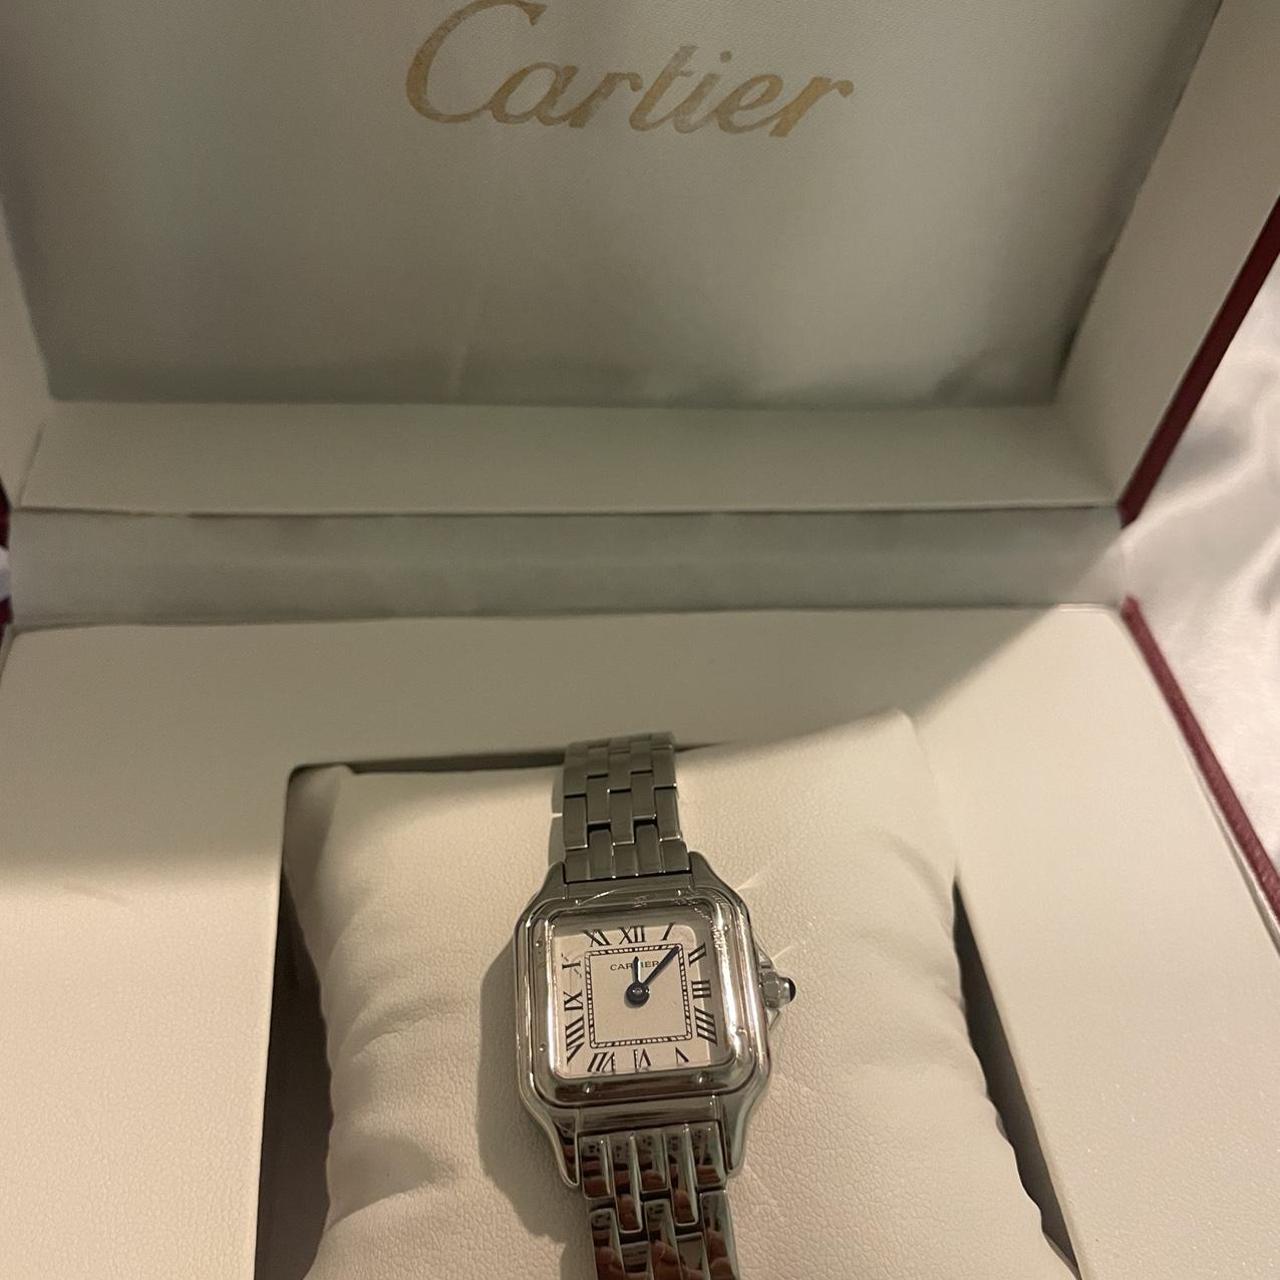 - FREE SHIPPING - Cartier panthere watch dupe -... - Depop